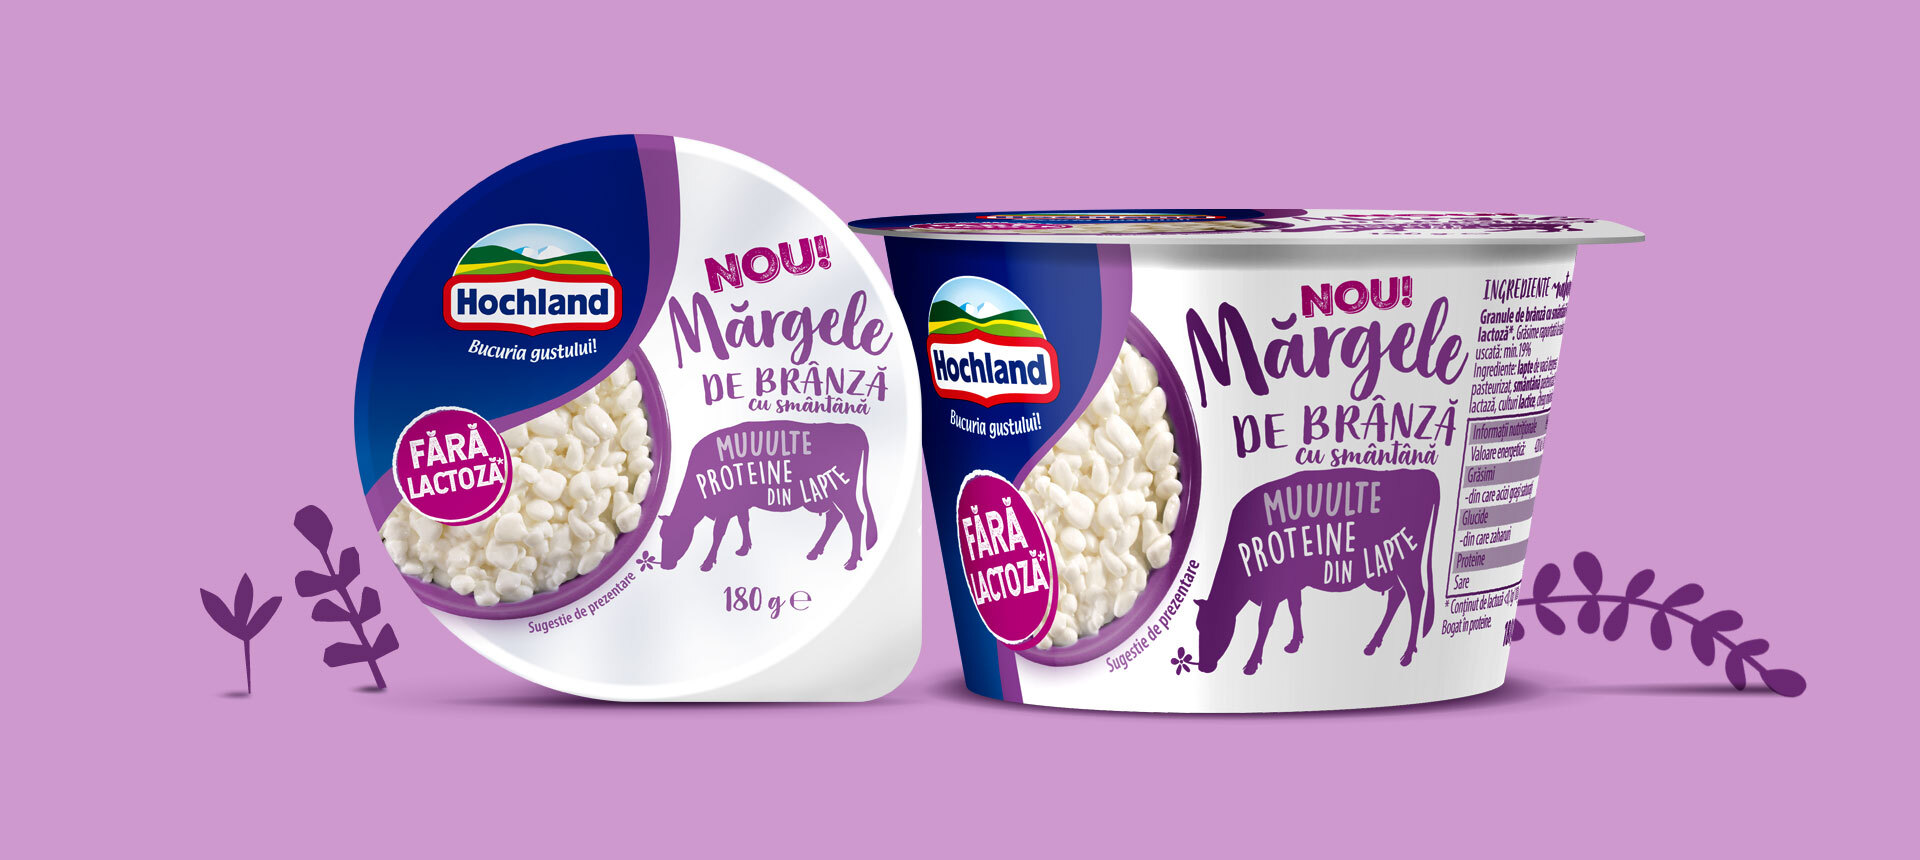 Cottage cheese packaging design for Hochland Margele de Branza line - variant flavour without lactose.